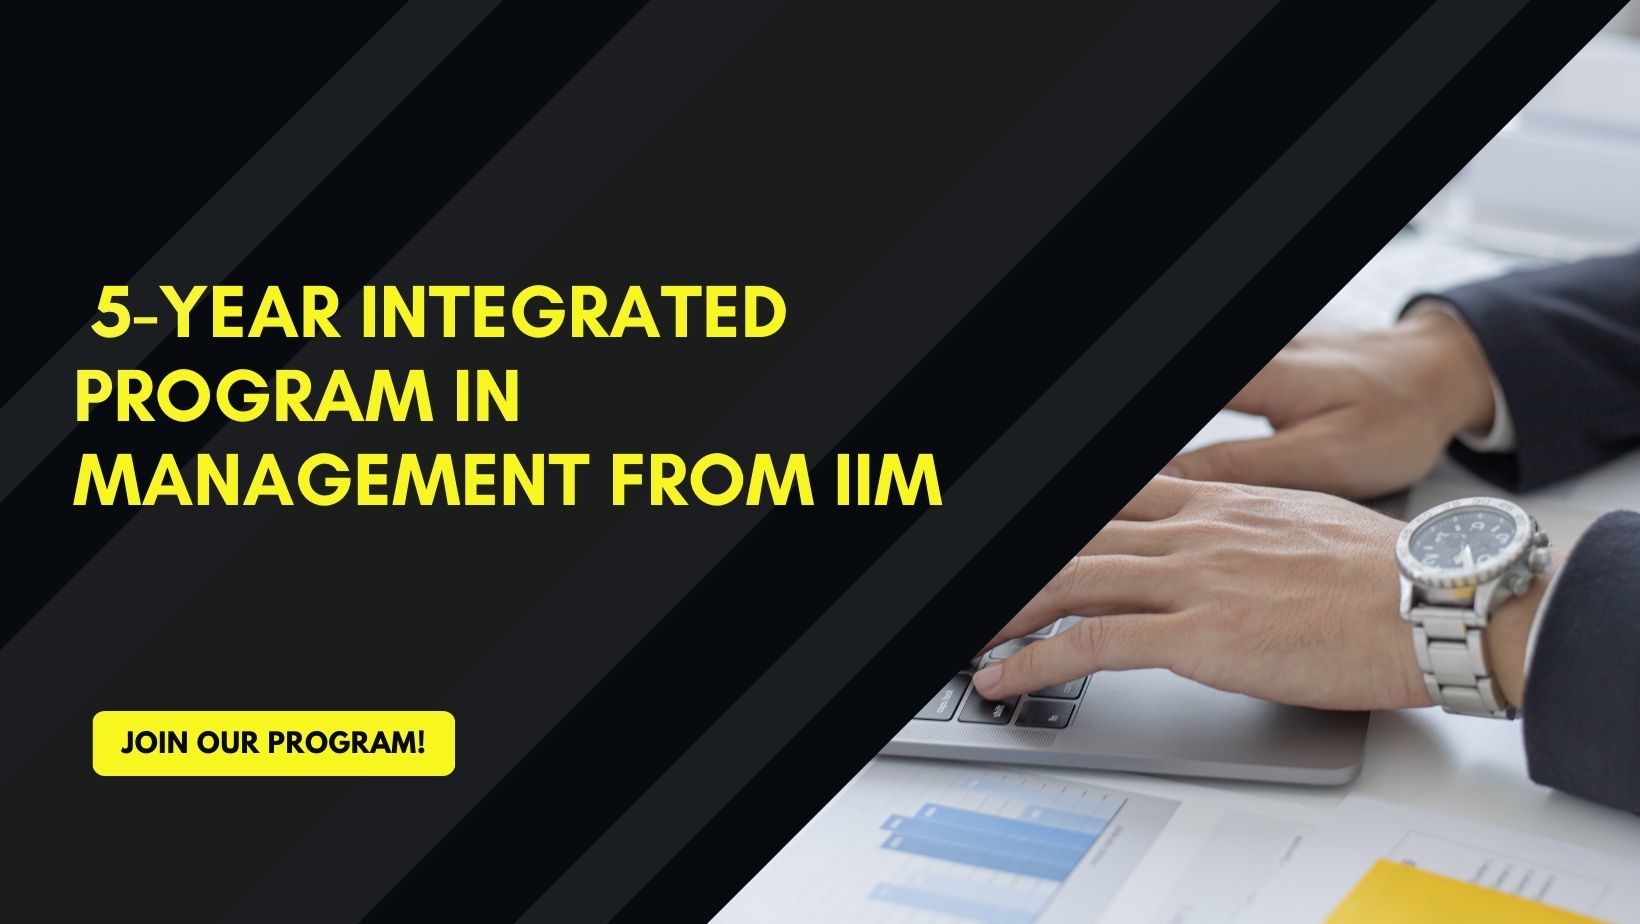 5-year Integrated Program in Management from IIM